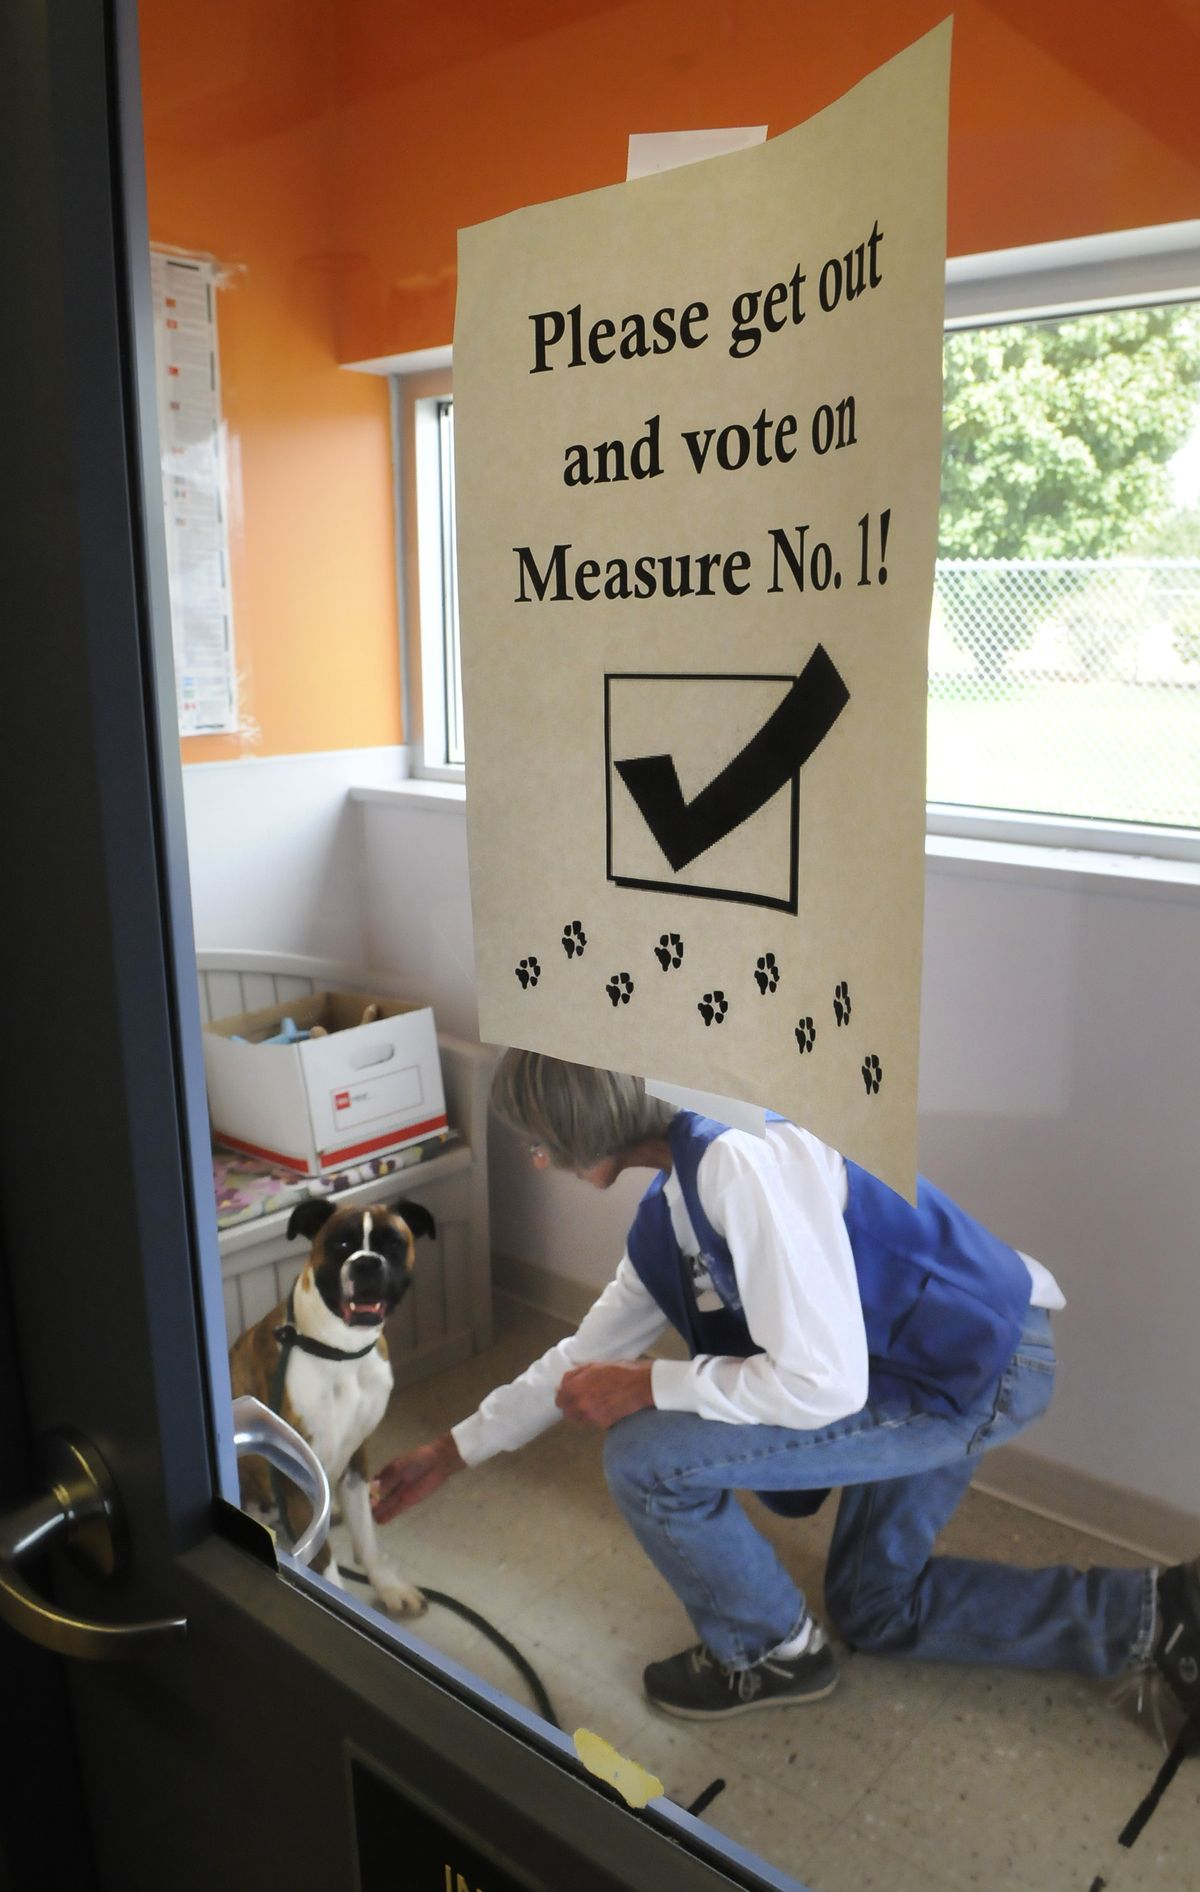 Volunteer Carol Ahrens works with an adult female boxer after walking the animal around the SCRAPS building on Friday in Spokane Valley. Ballot Measure 1, which is on the Nov. 8 ballot, seeks to implement a levy to help pay for replacing the Spokane County animal shelter building. (Dan Pelle)